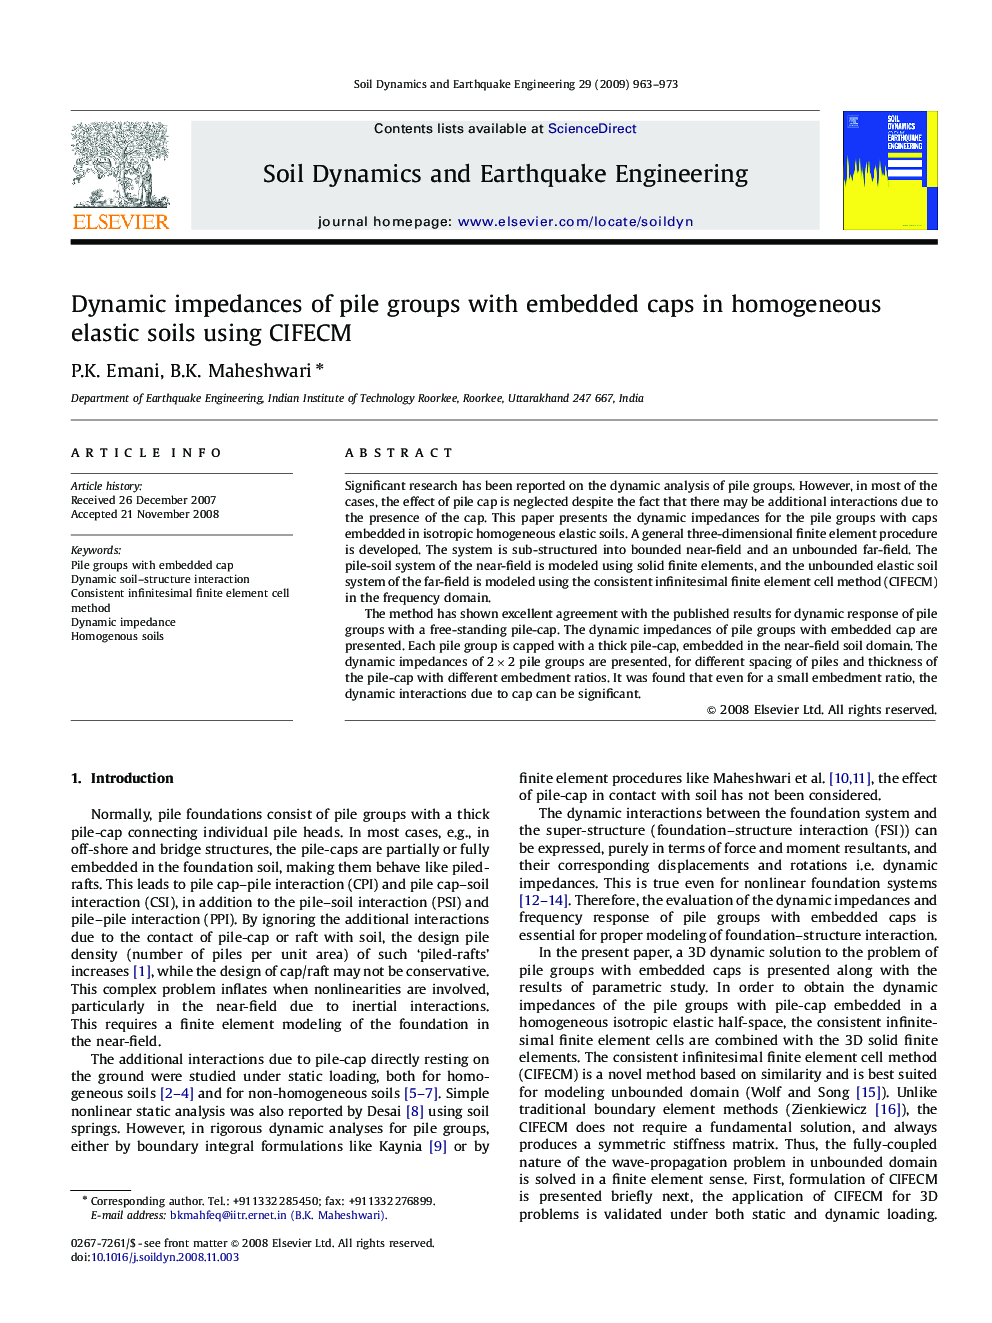 Dynamic impedances of pile groups with embedded caps in homogeneous elastic soils using CIFECM